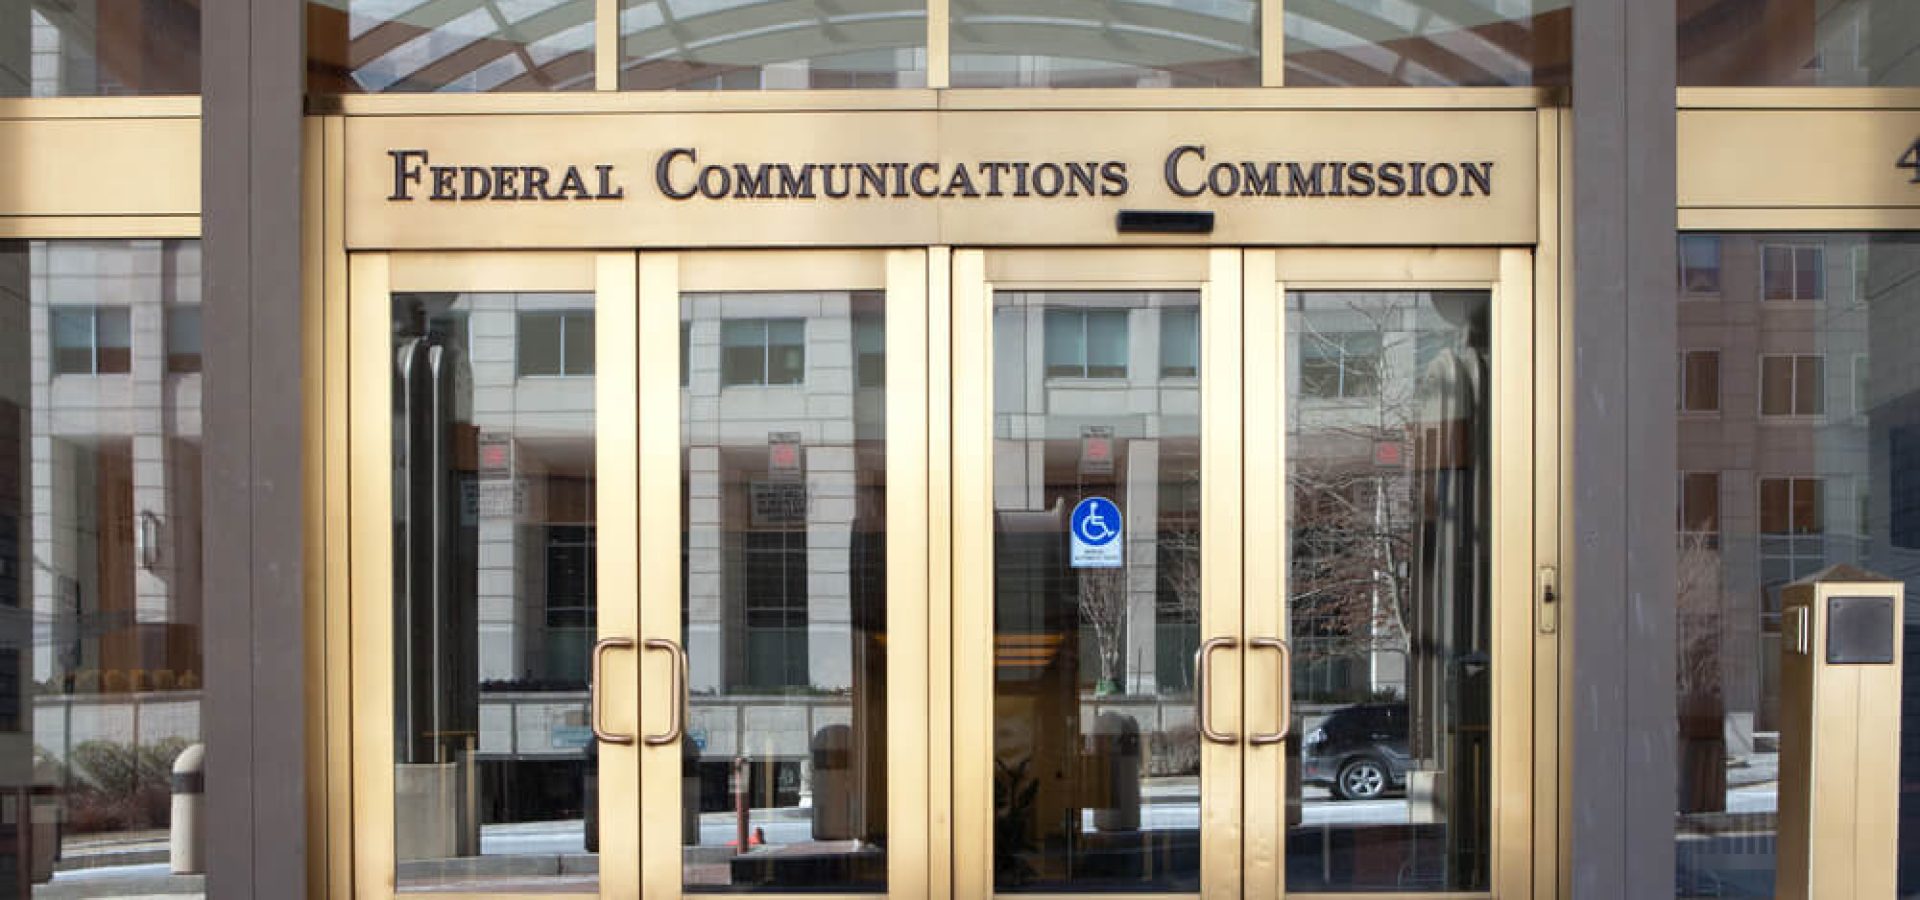 Federal Communications Commission Headquarters